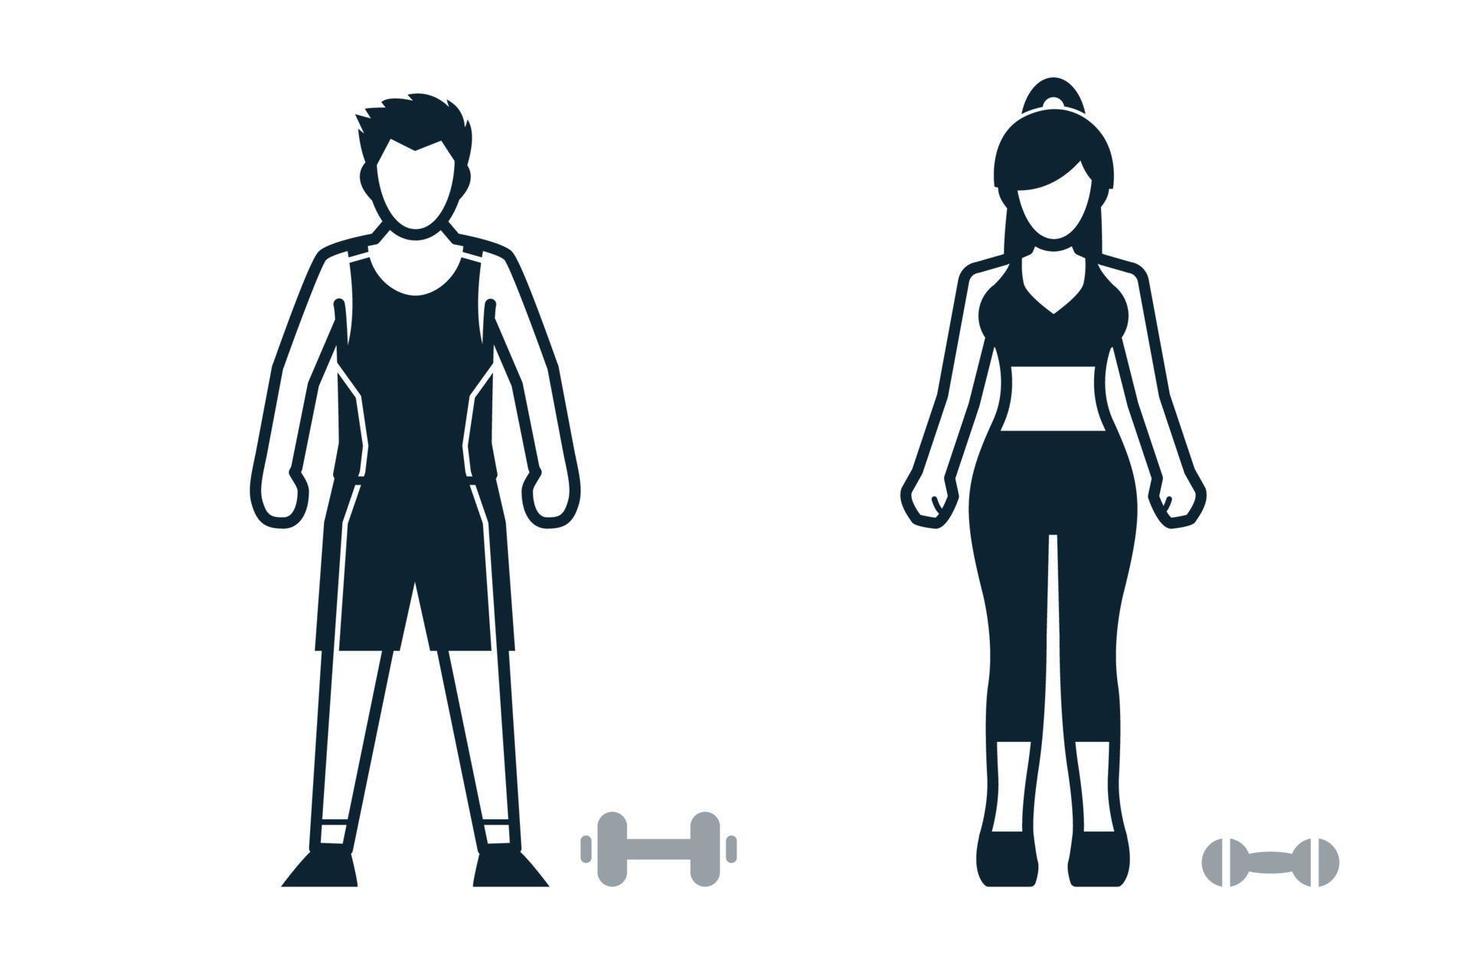 Exerciser, Sport Player, People and Clothing icons with White Background vector